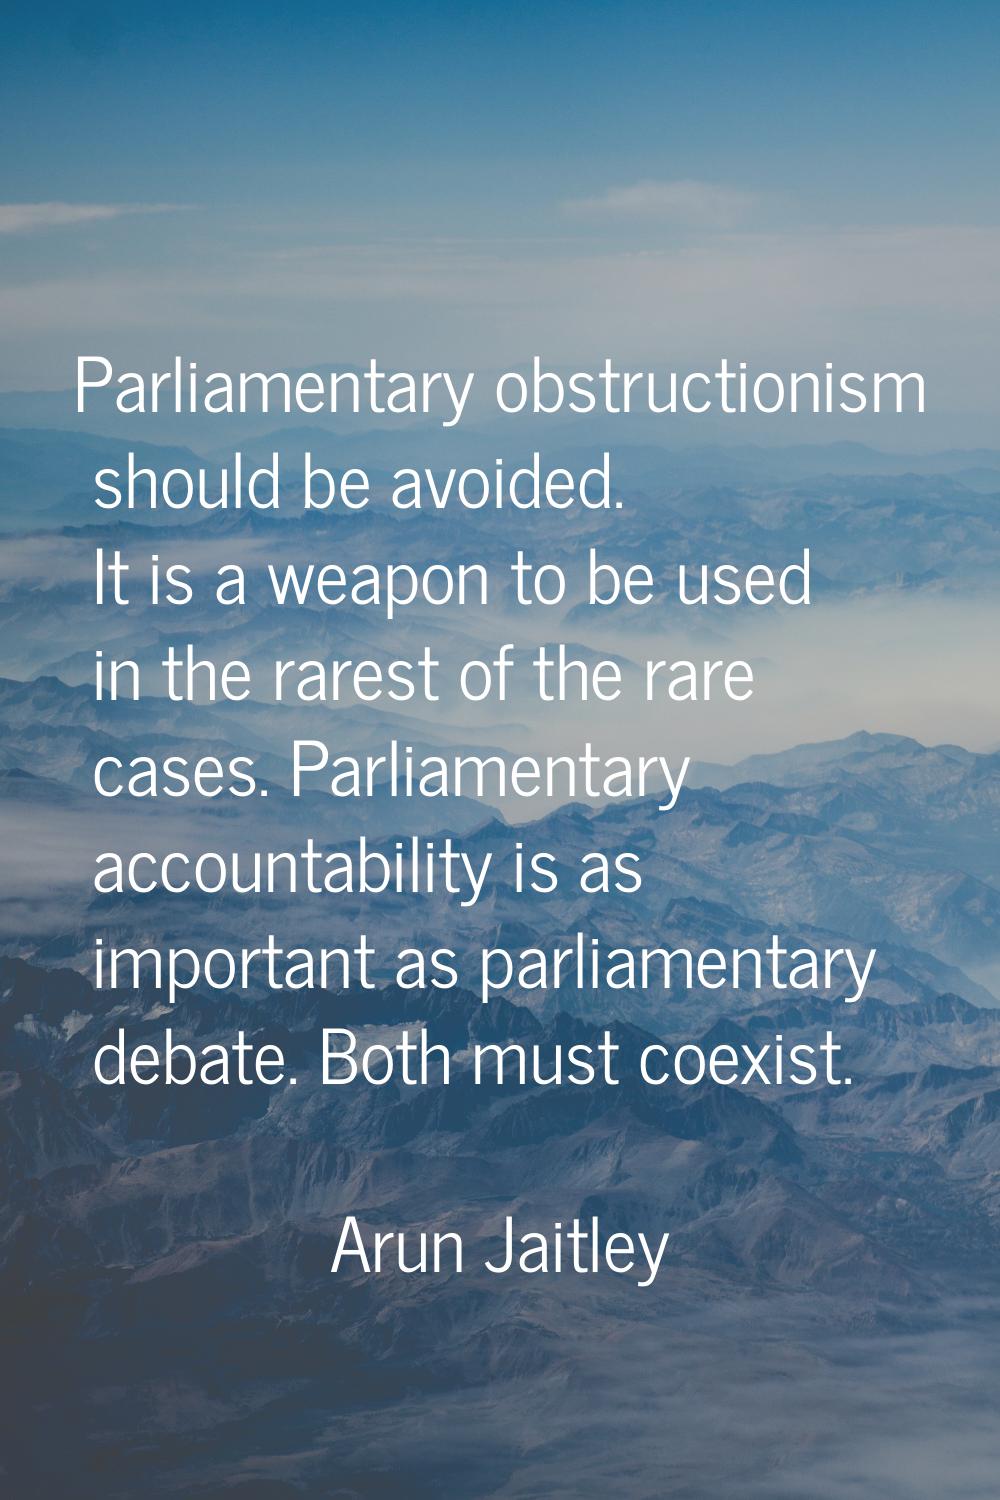 Parliamentary obstructionism should be avoided. It is a weapon to be used in the rarest of the rare